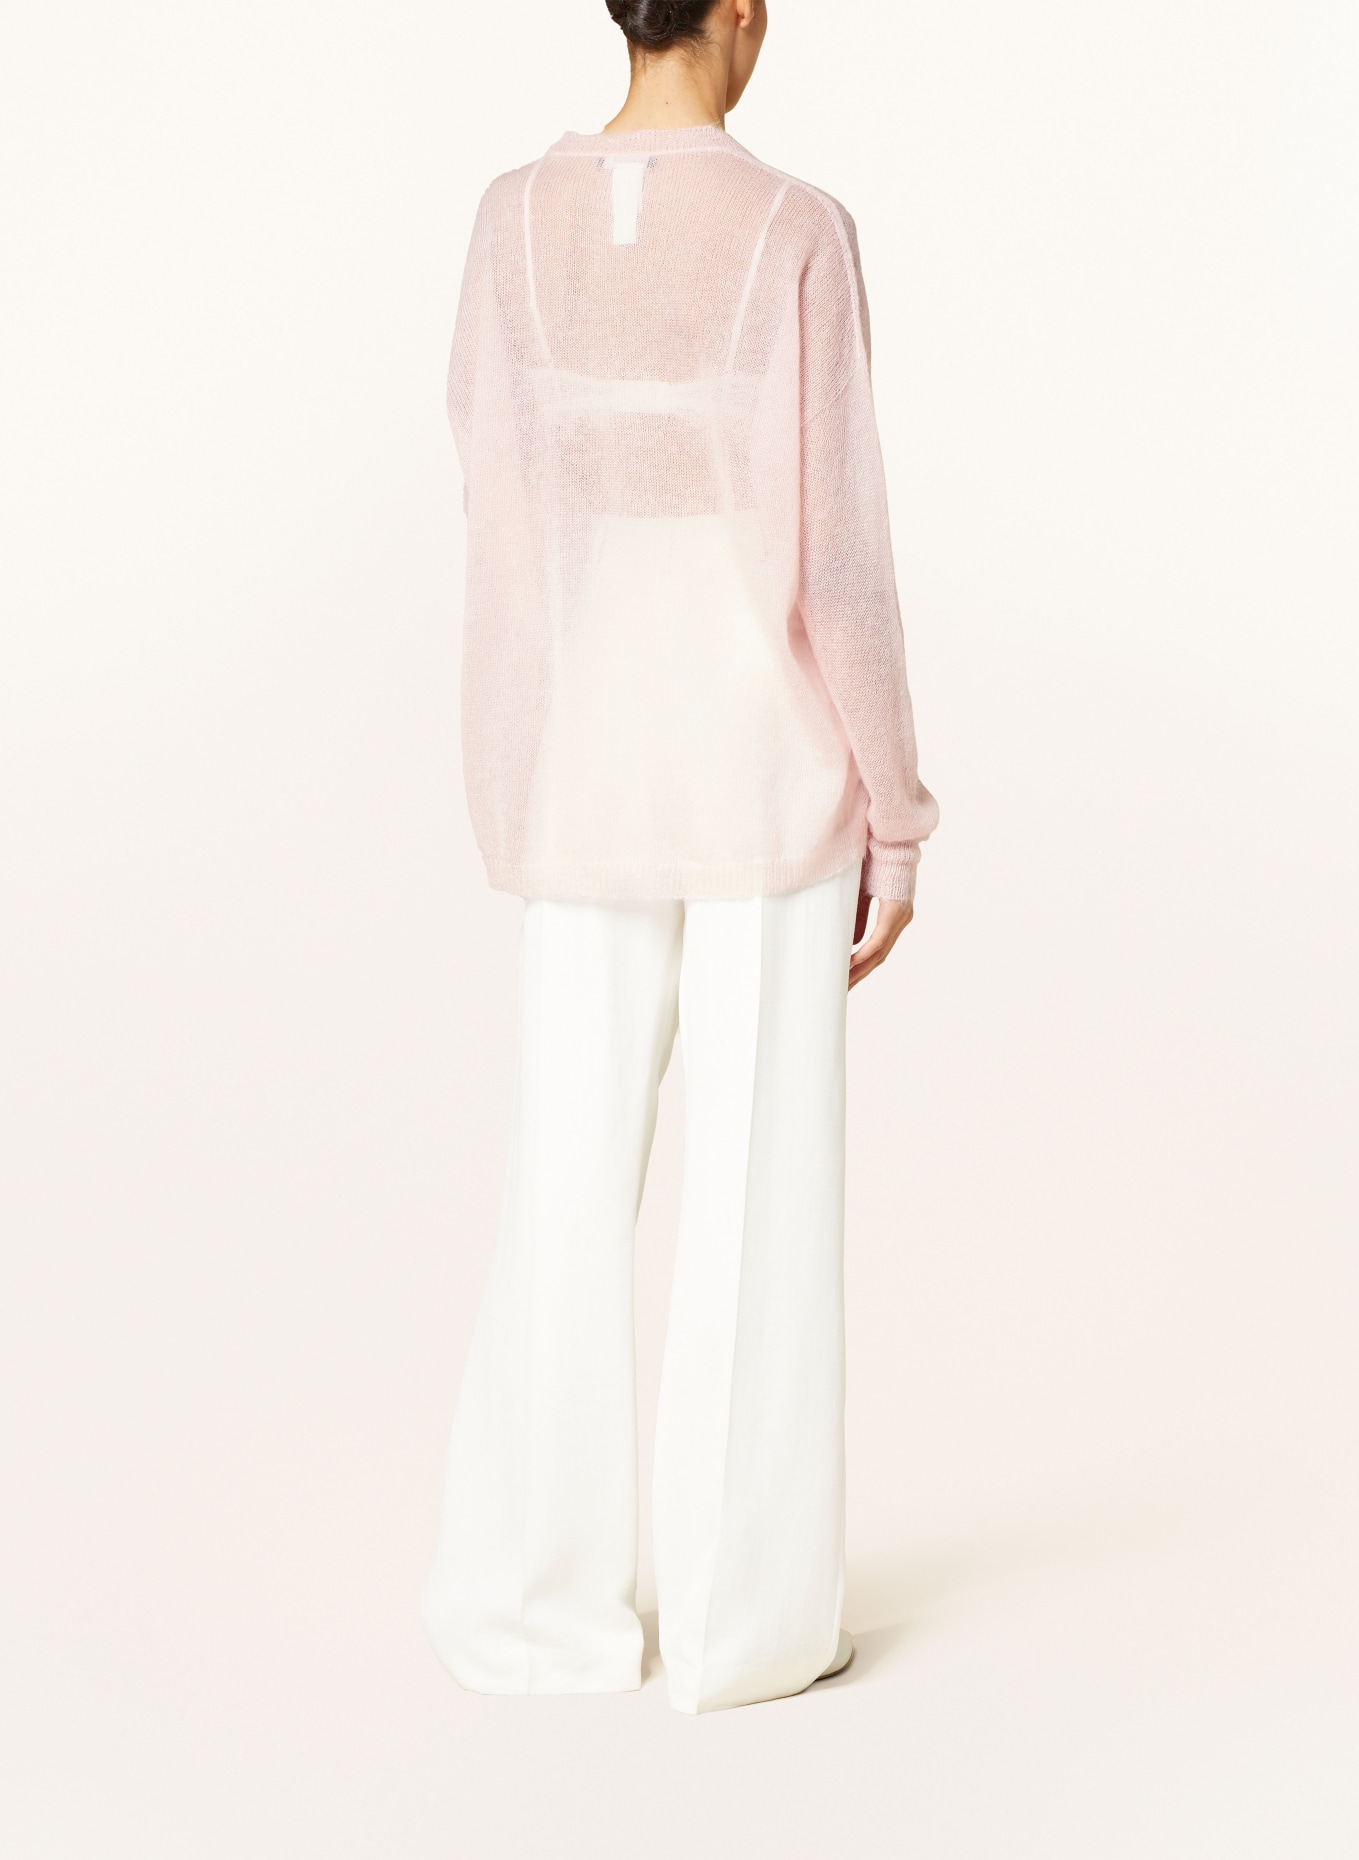 FABIANA FILIPPI Sweater with mohair, Color: LIGHT PINK (Image 3)